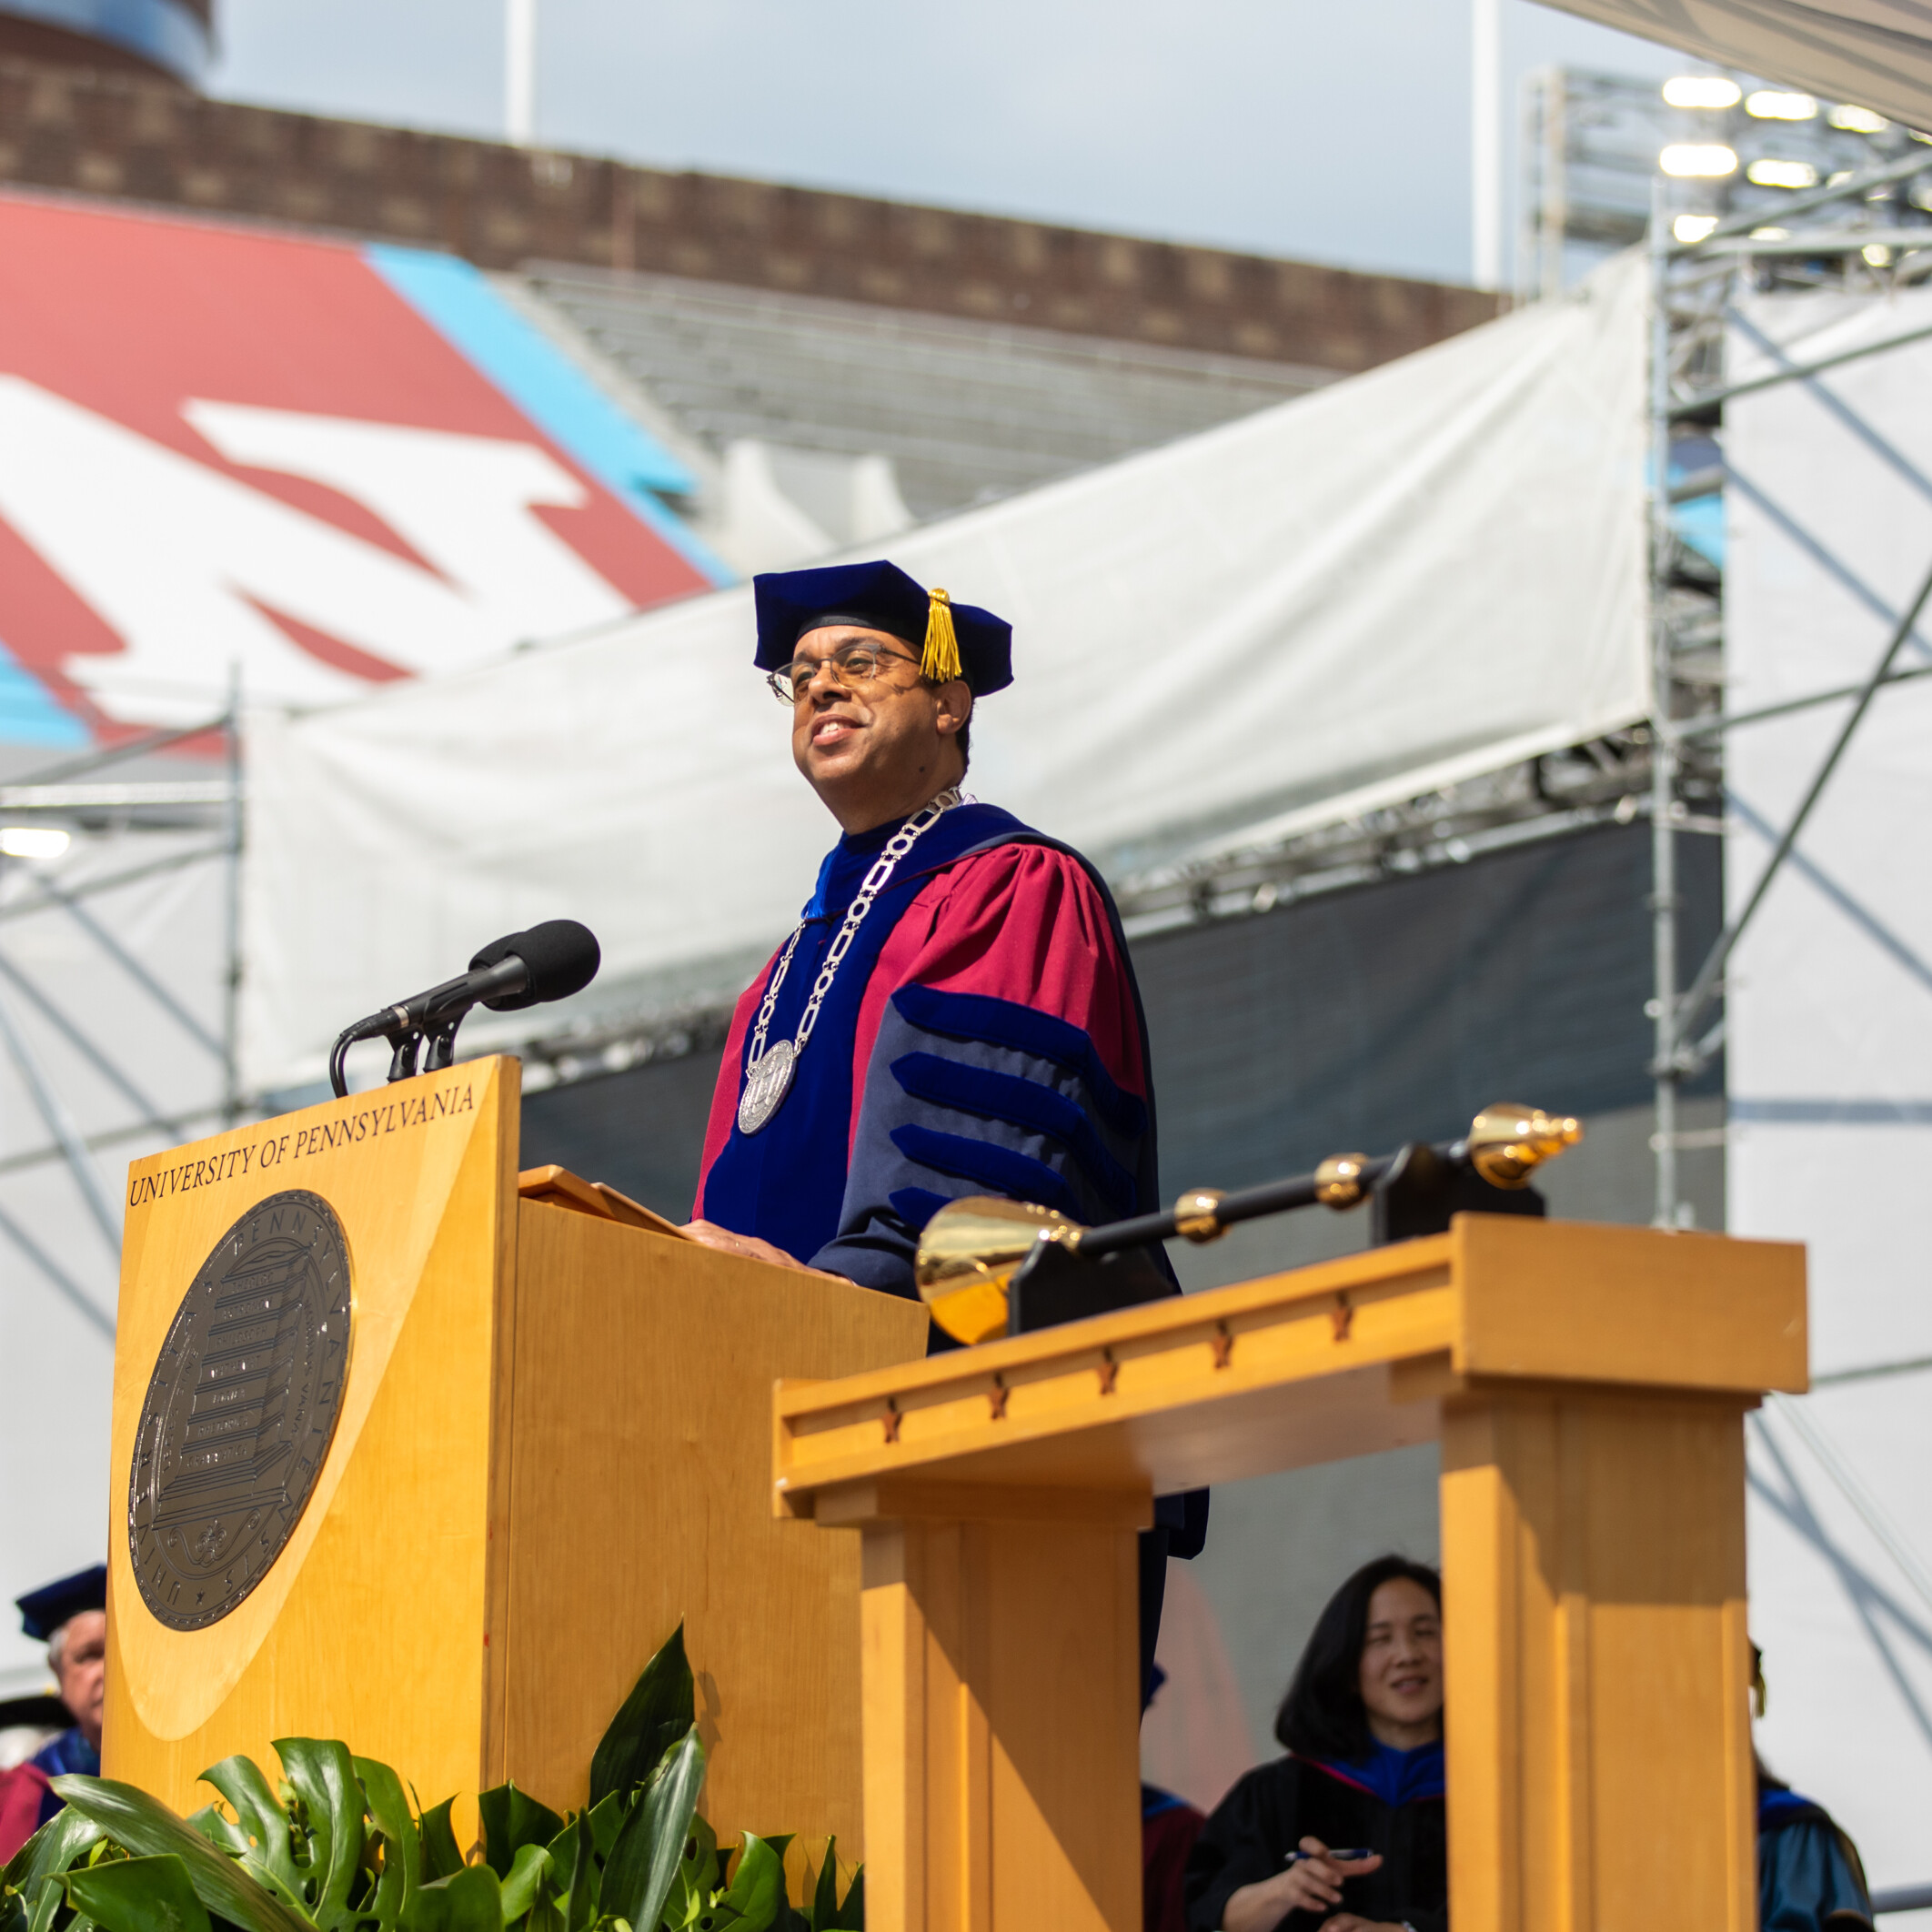 Penn President 2022 - Classes of 2020 and 2021 In-Person Commencement